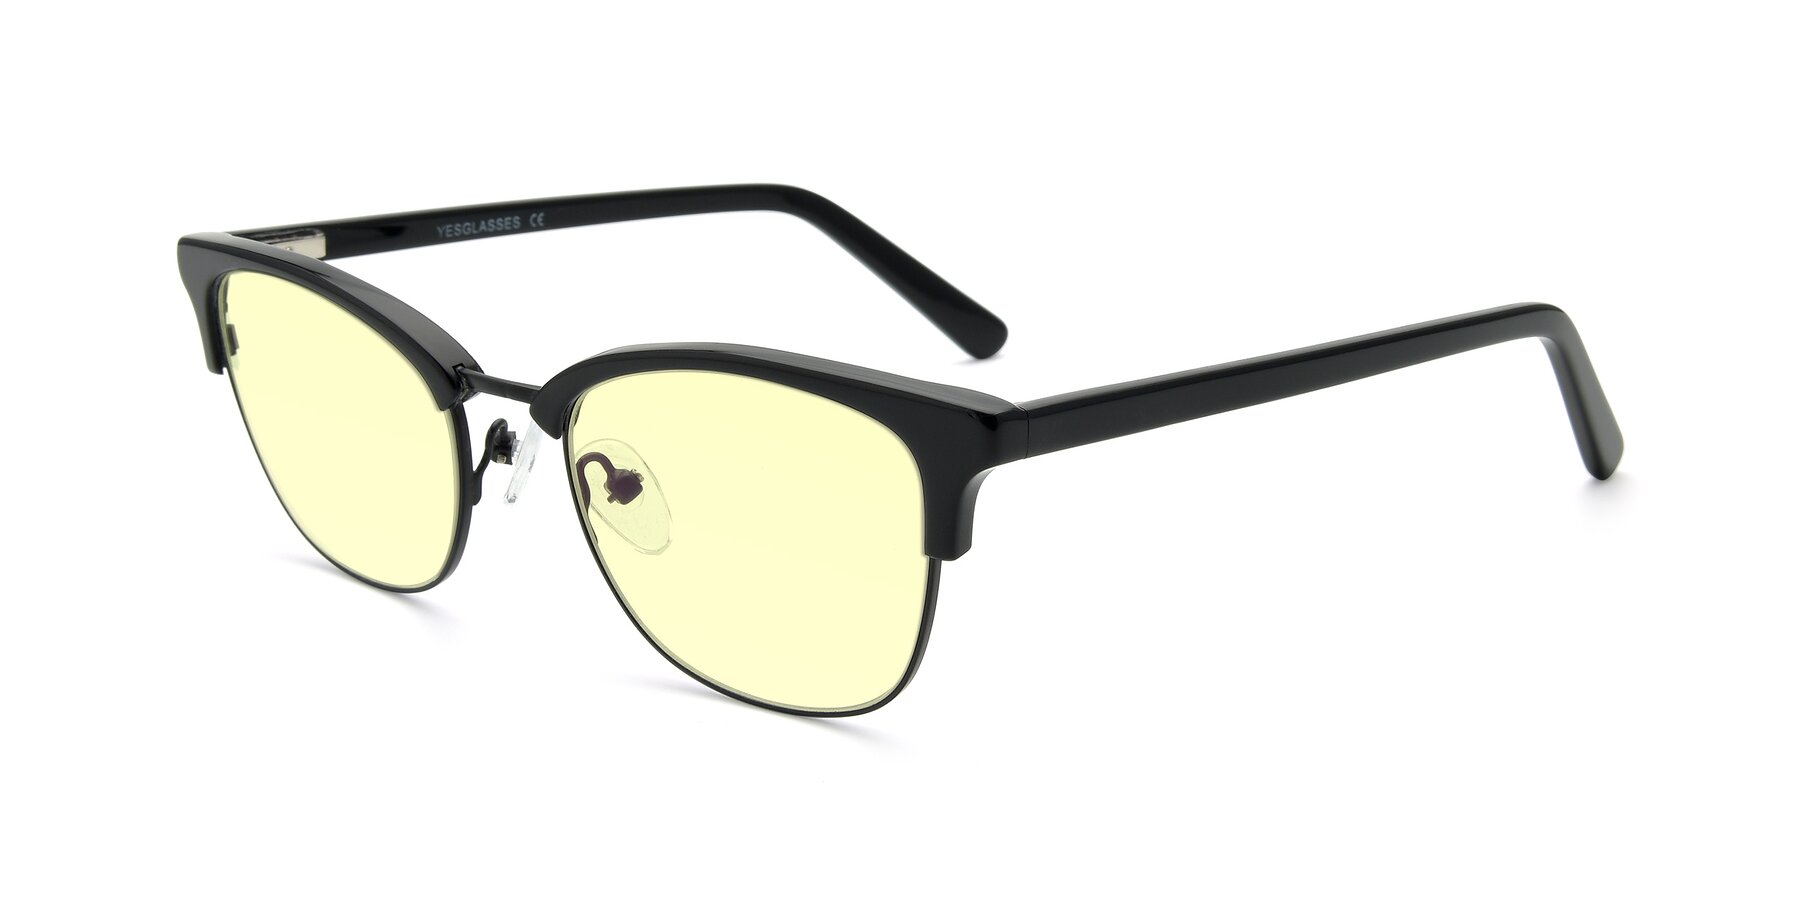 Angle of 17463 in Black with Light Yellow Tinted Lenses